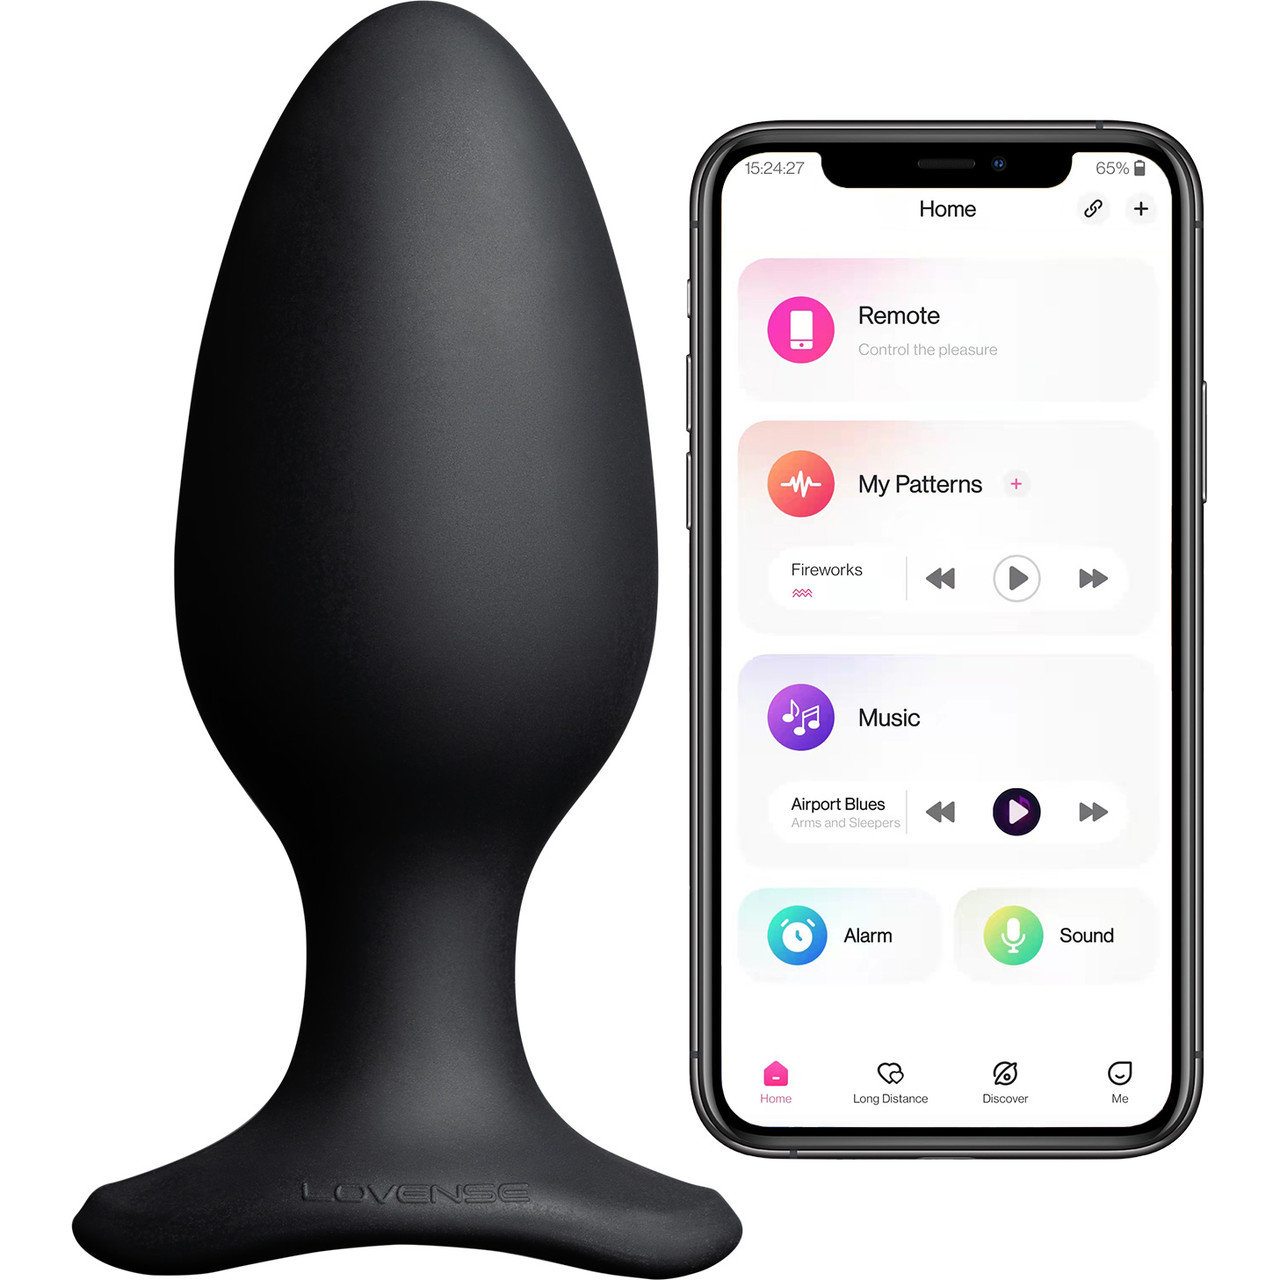 Lovense Hush 2 Review - Is this the Best Butt Plug Yet? - Interactive Vibrating Butt Plug